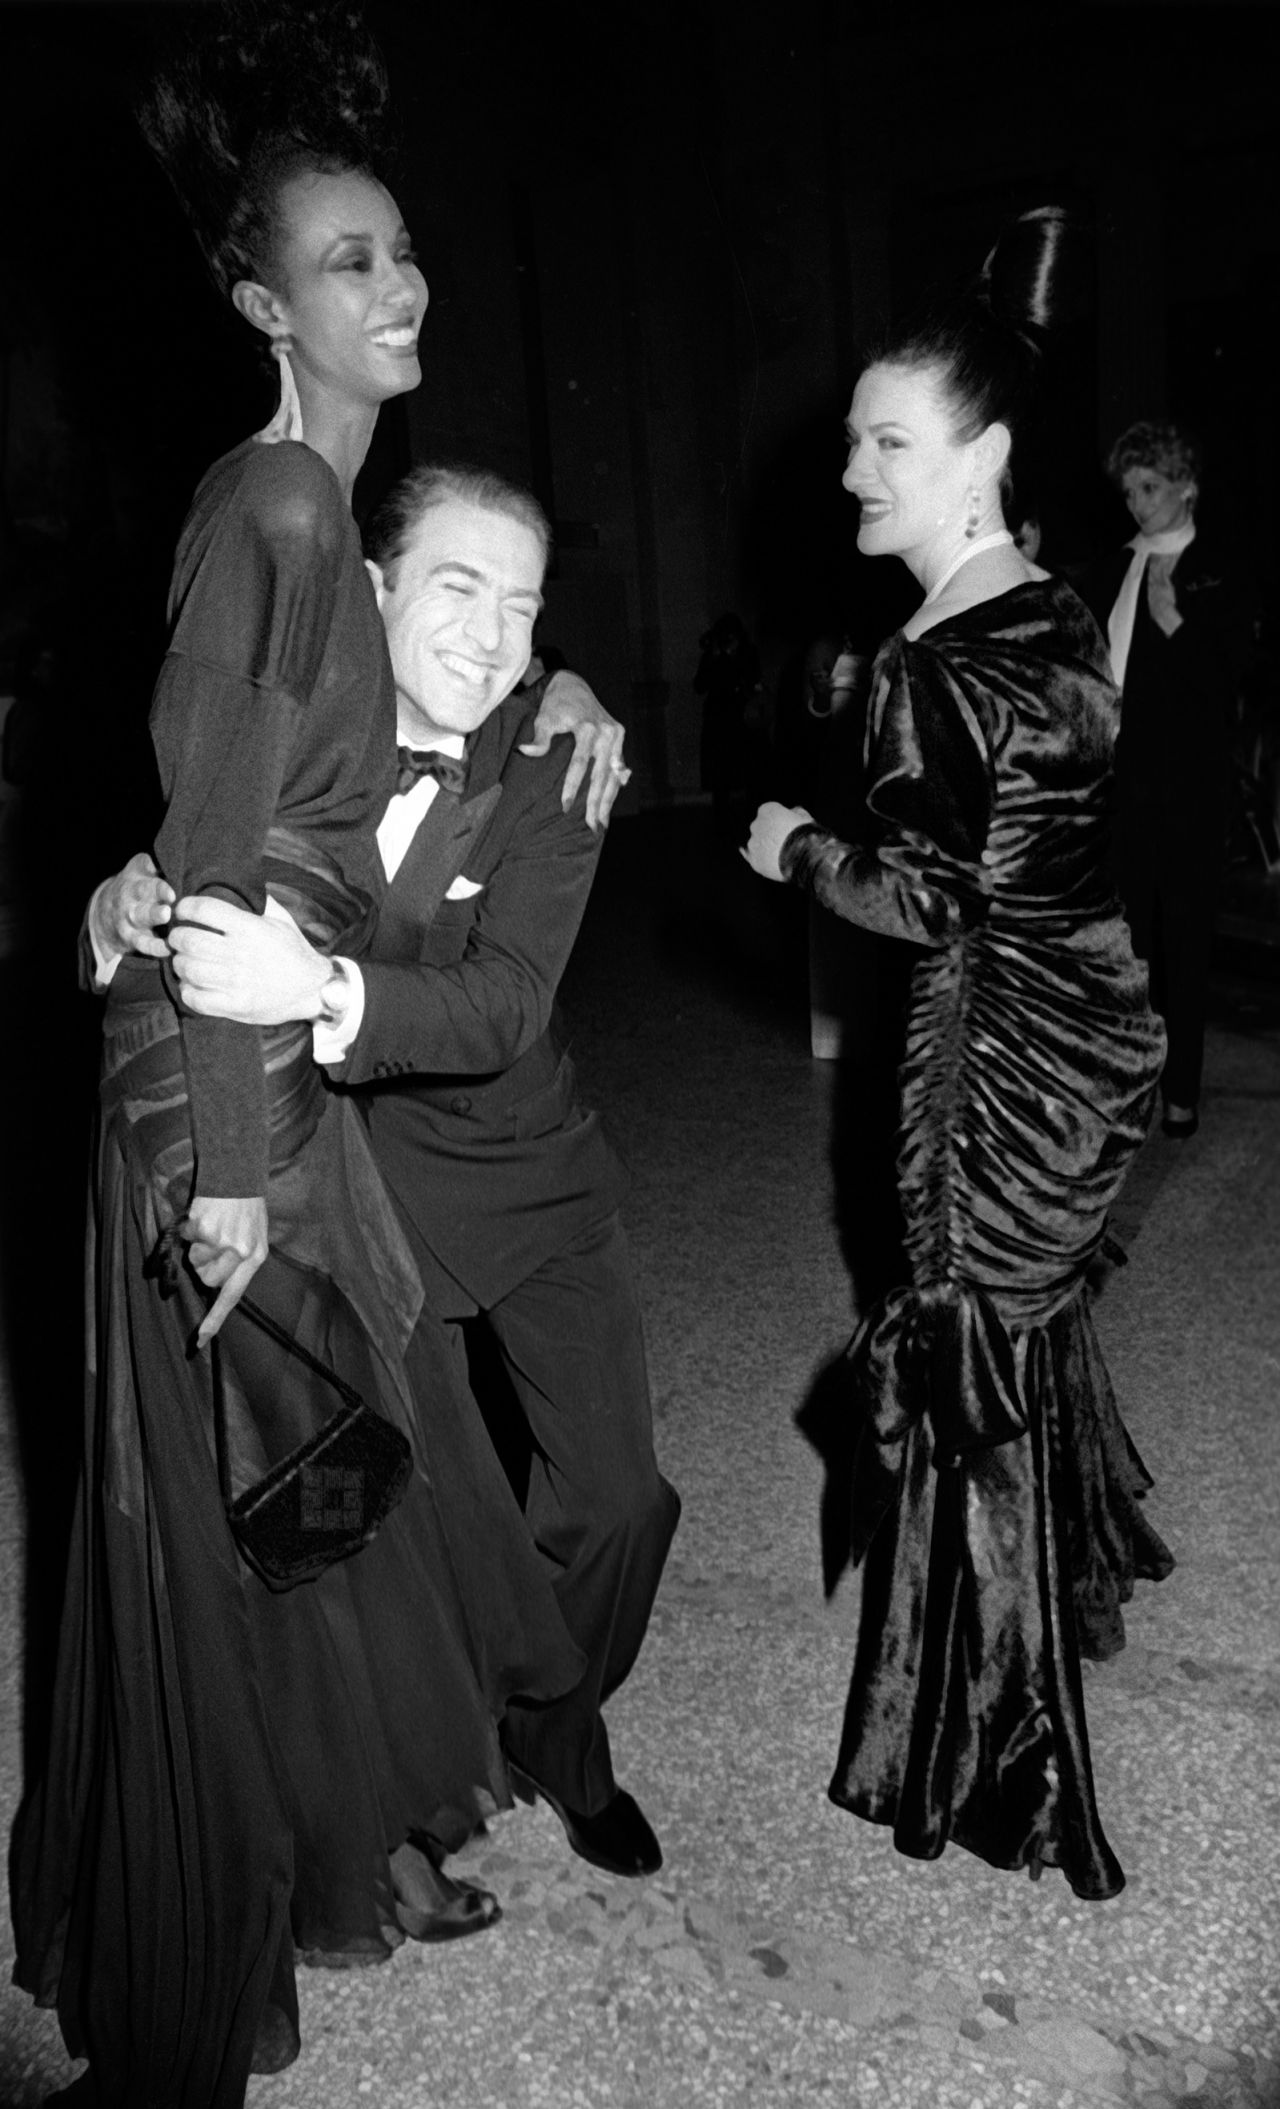 Galella snapped this light moment of Iman, Paloma Picasso and Raphael Lopez Sanchez at the 1983 Met Gala, which honored the work of Yves St. Laurent.